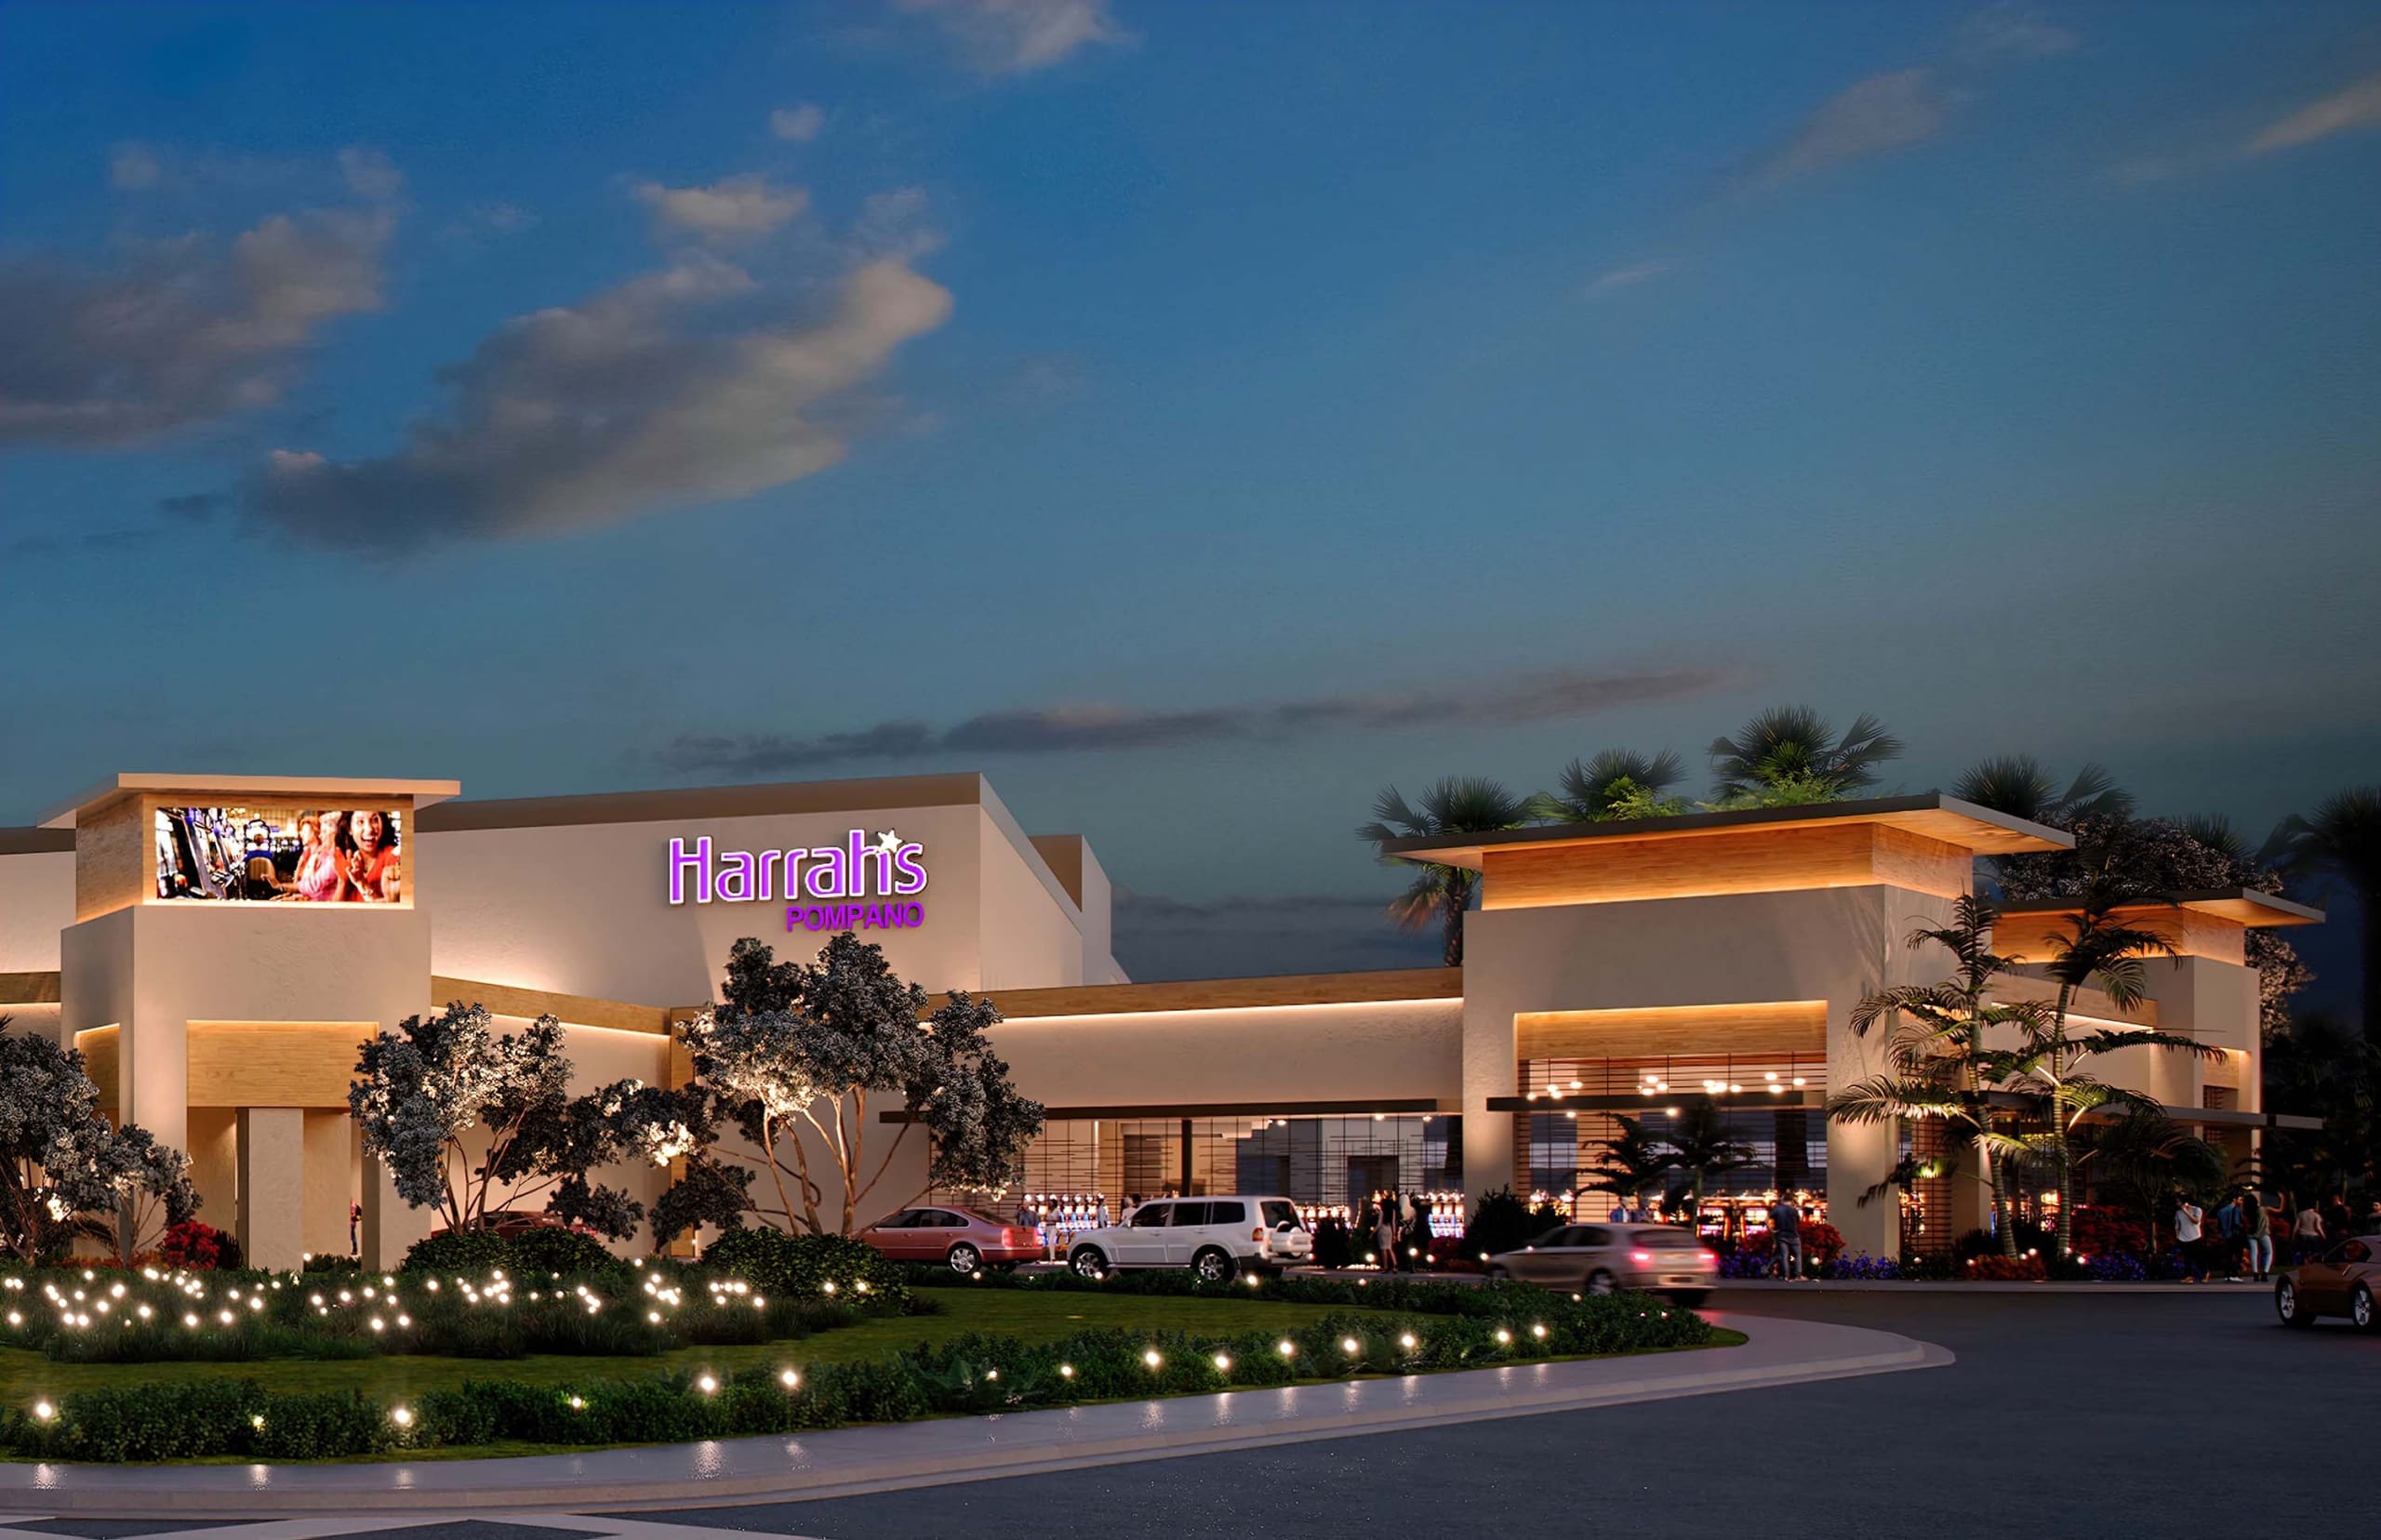 Rendering of Harrah's Pompano Beach with the new gaming terrace (on right).